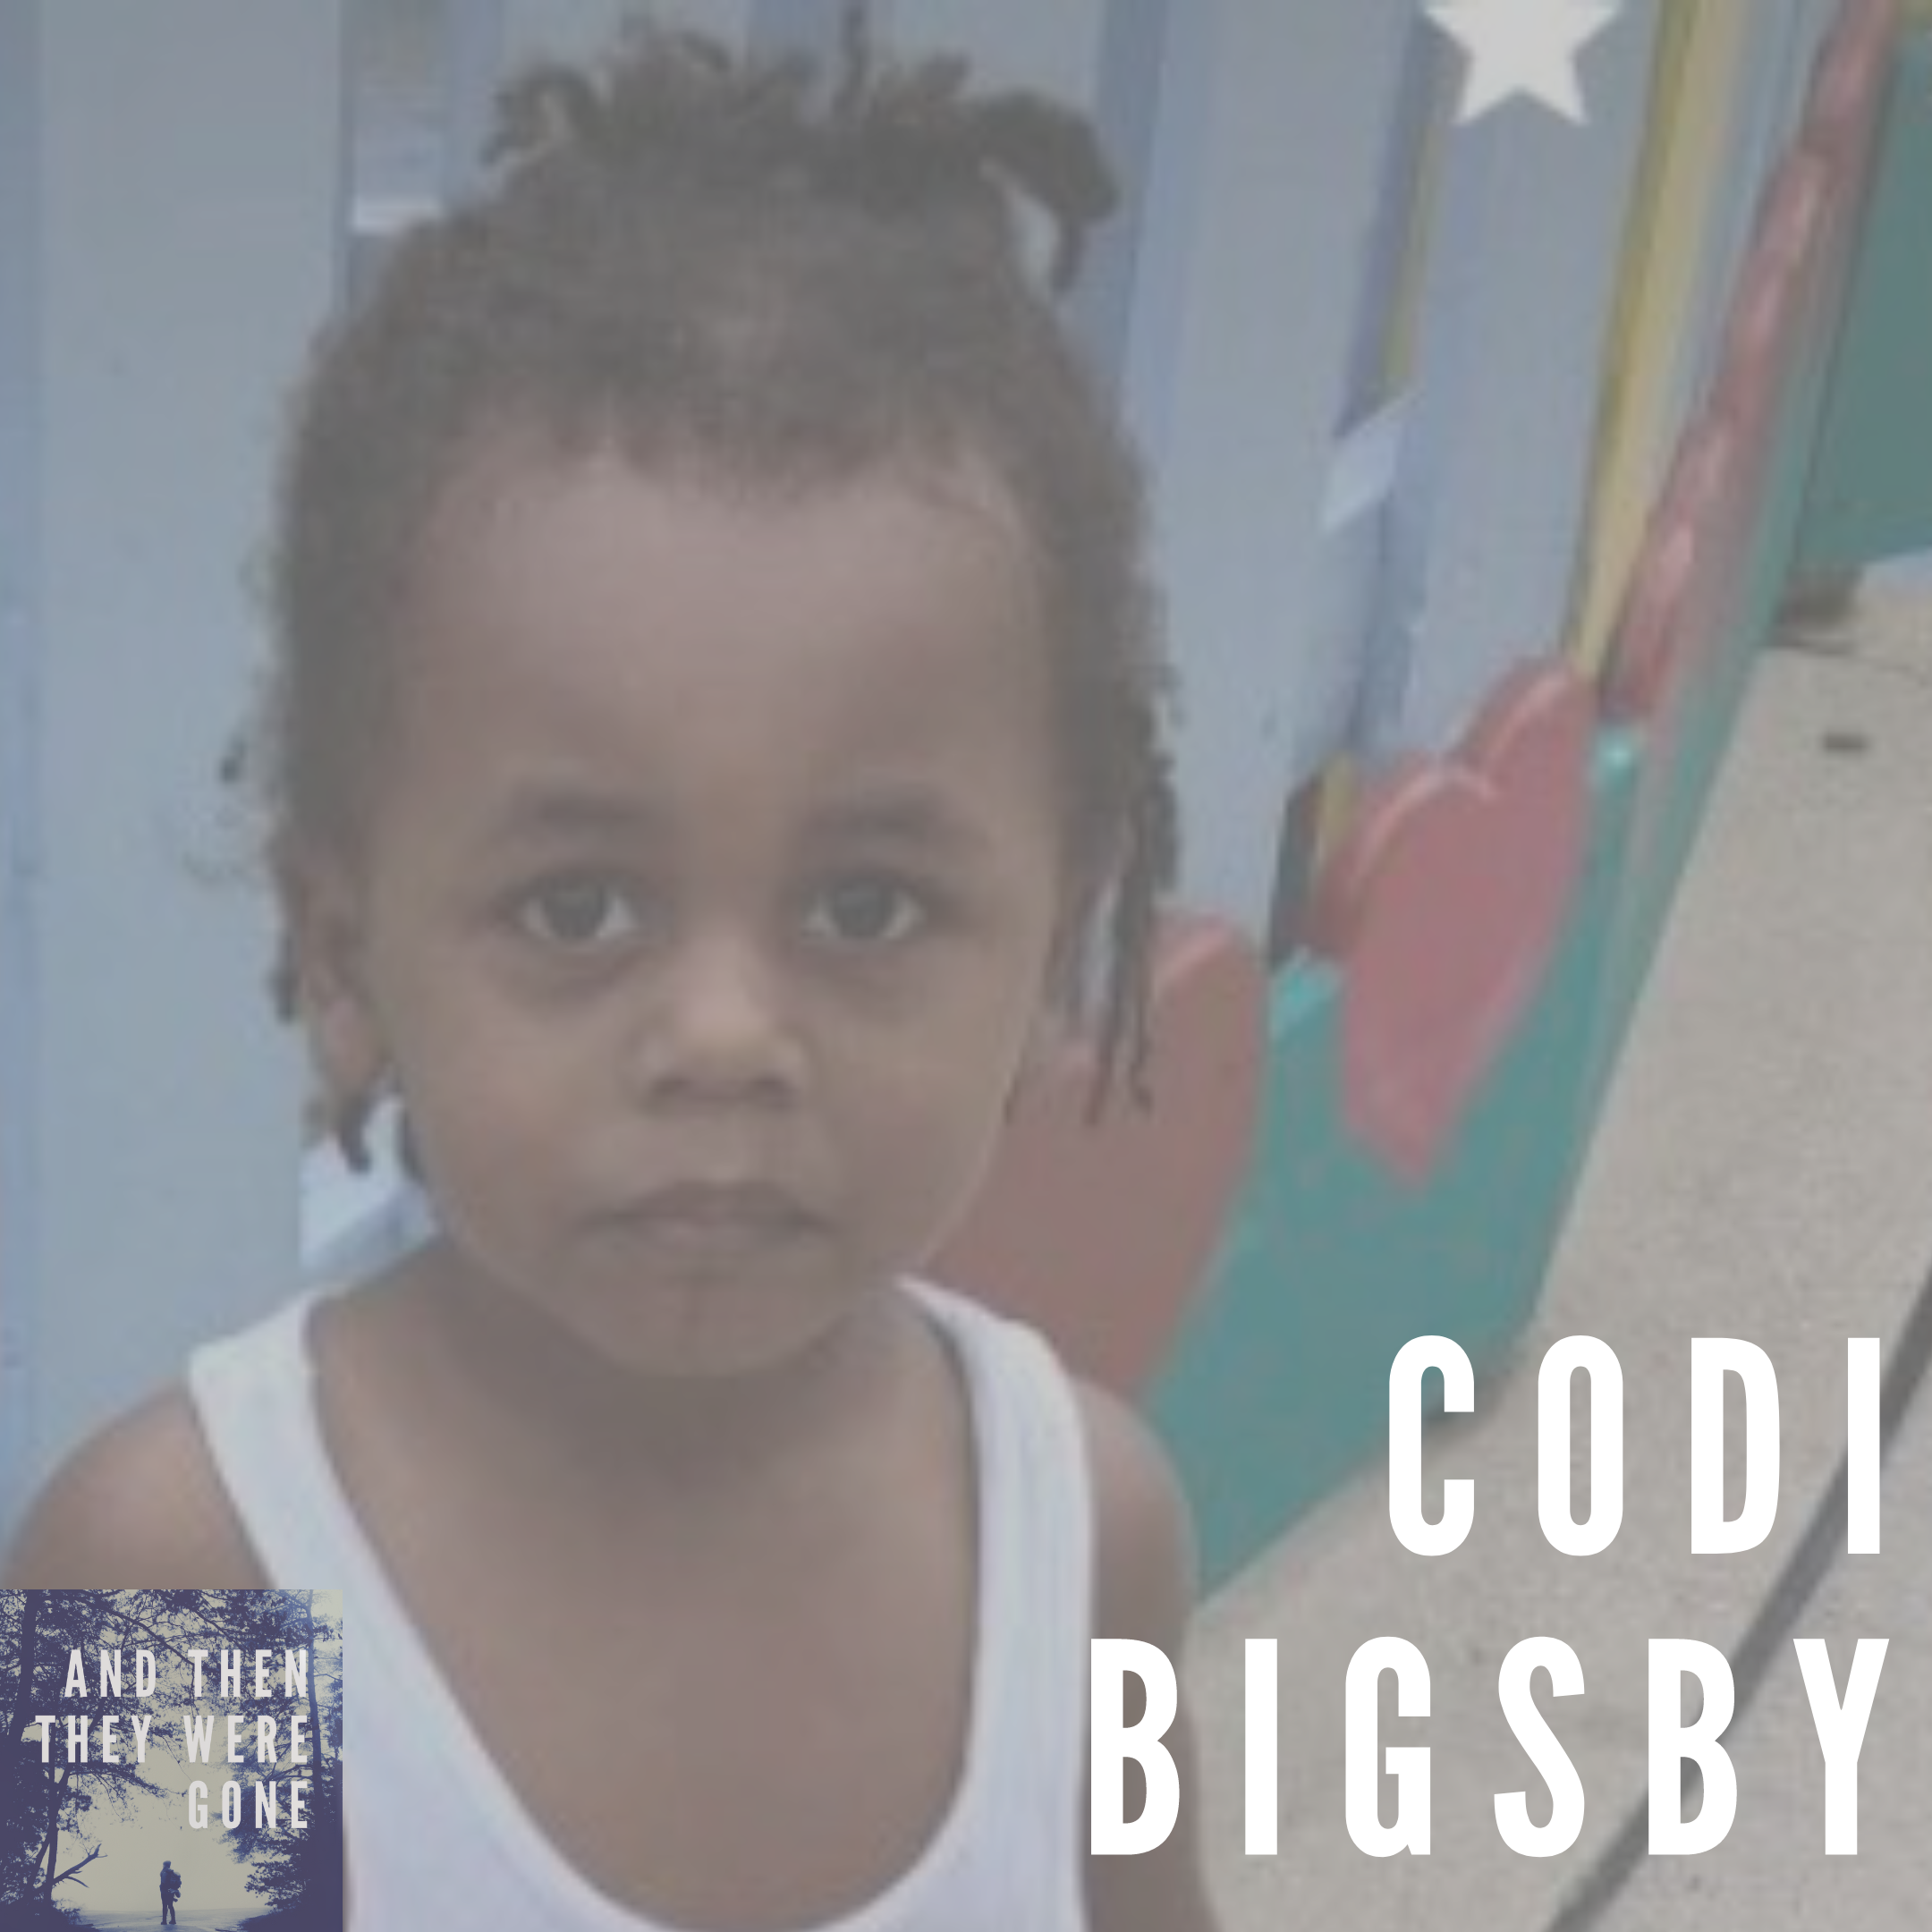 Codi Bigsby has been missing since January 31, 2022